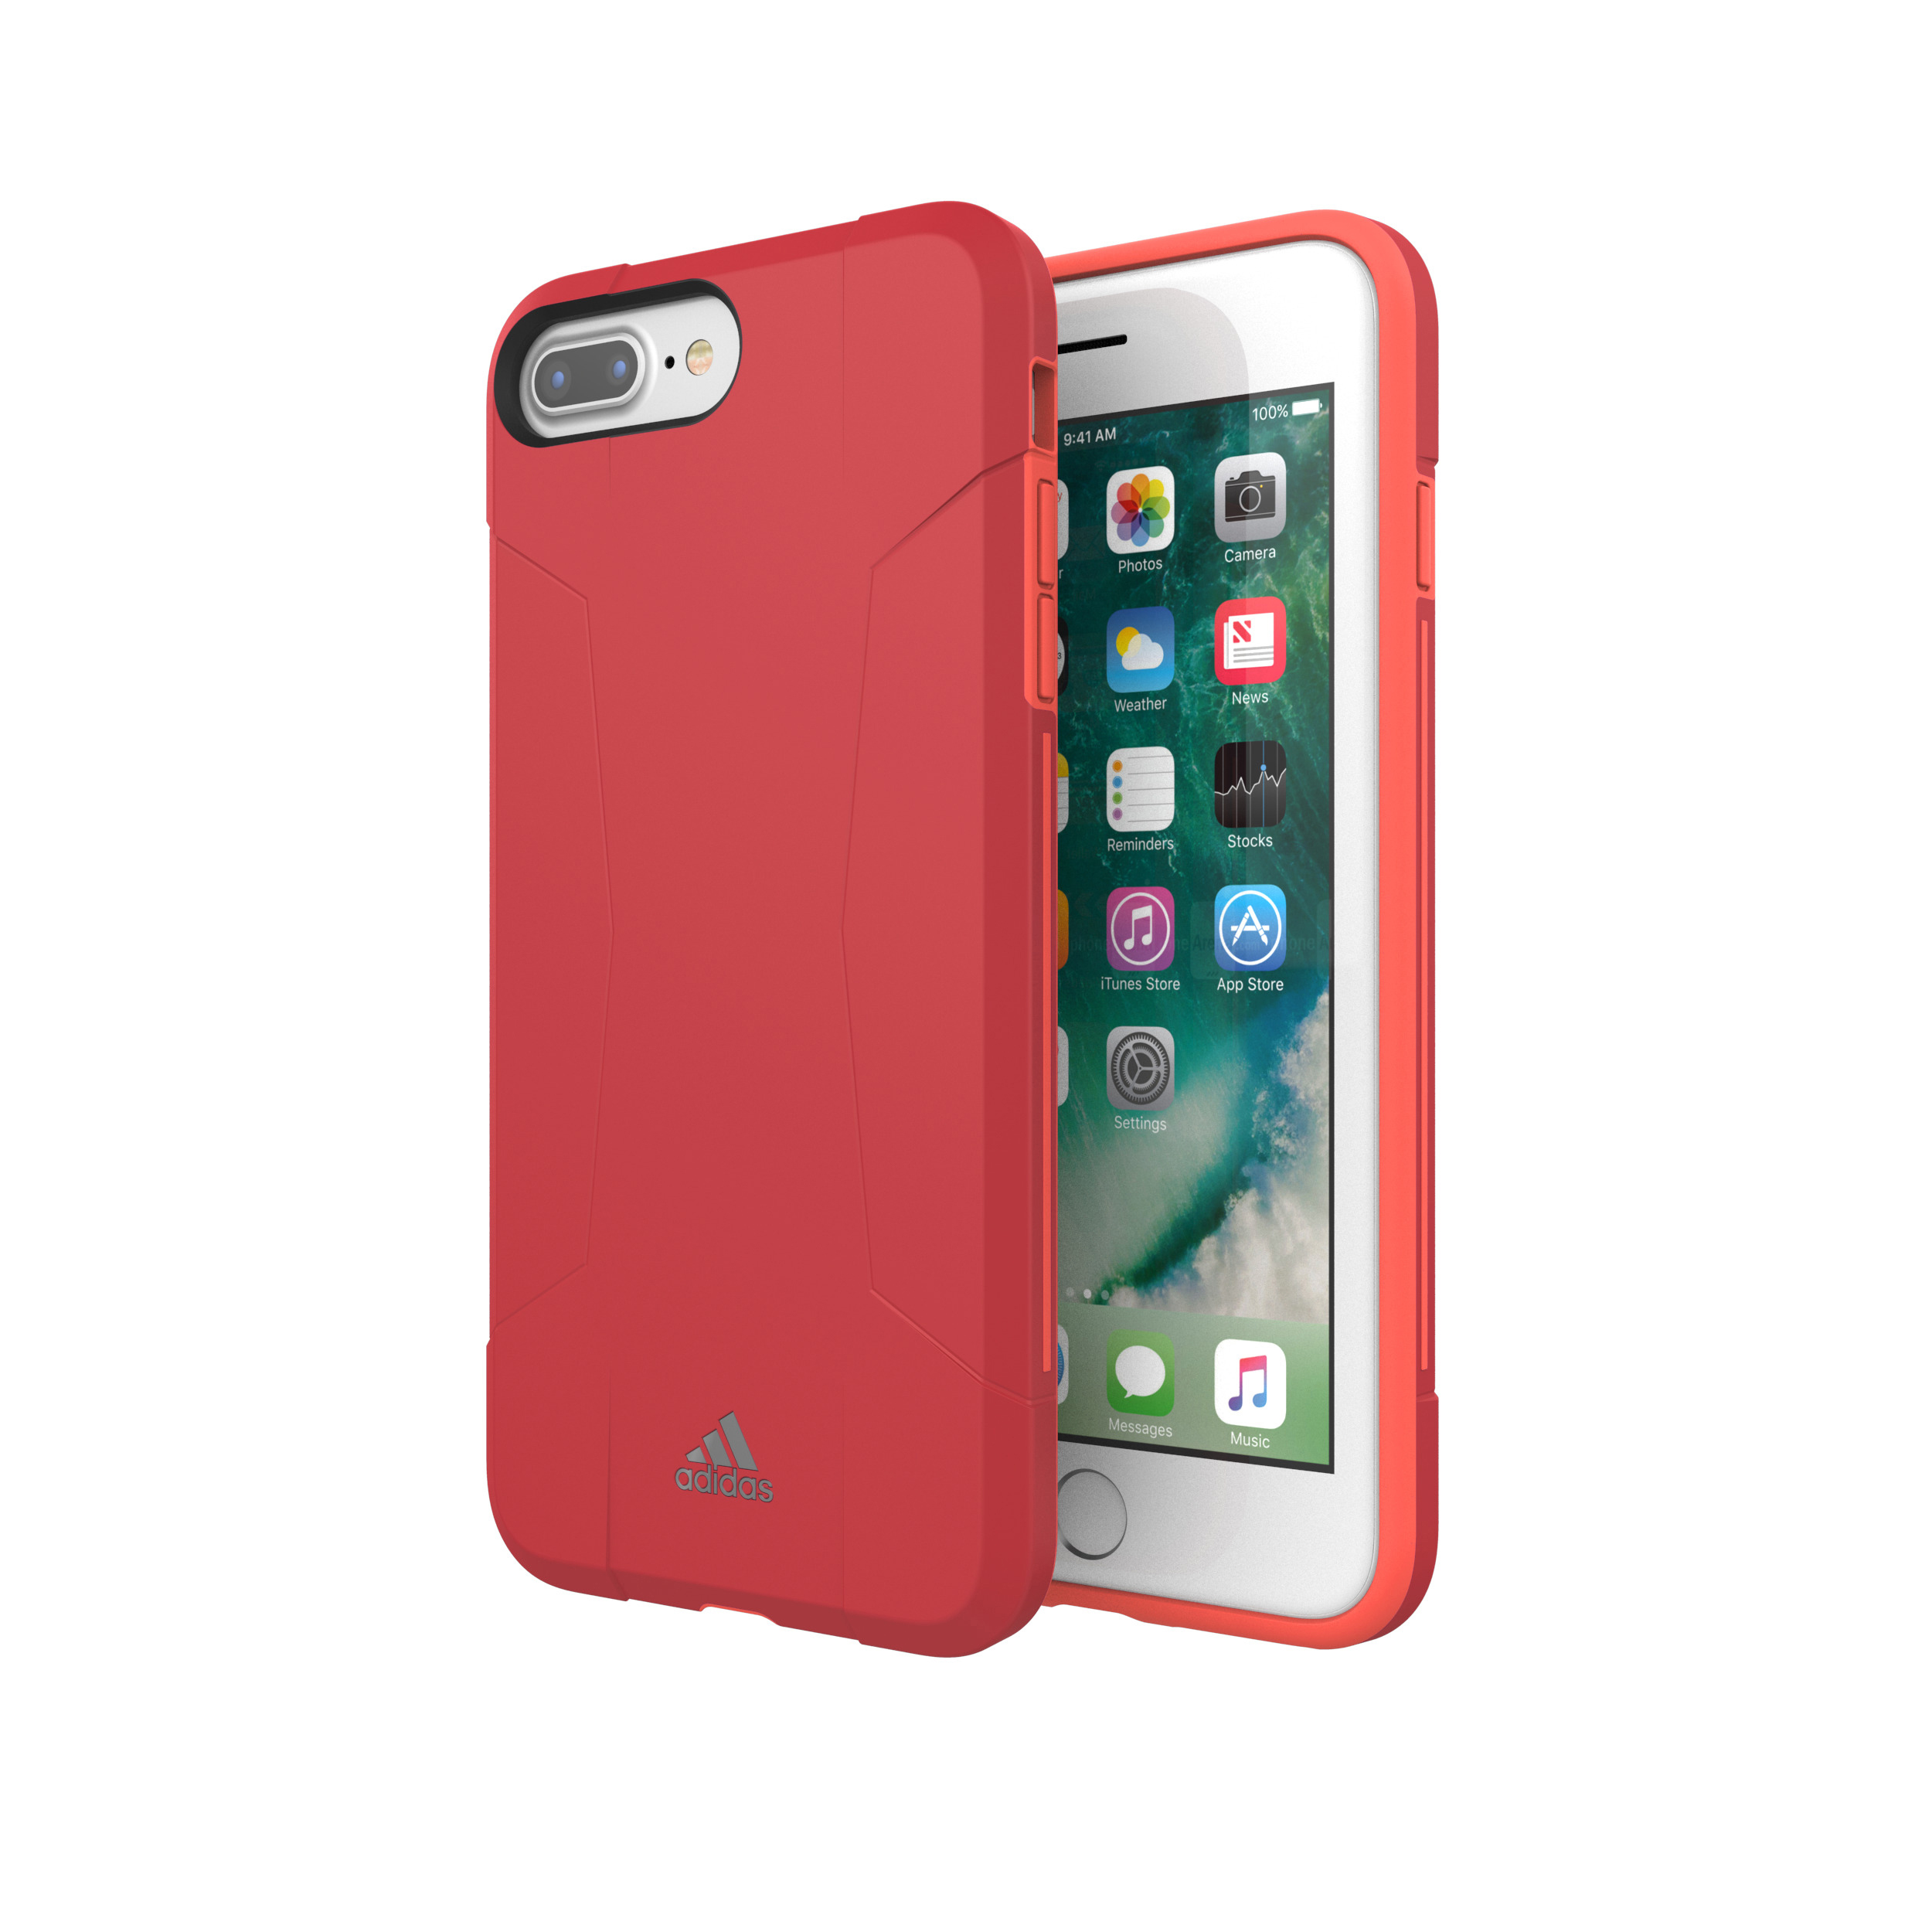 ADIDAS Apple, Backcover, Pink iPhone iPhone SPORT 6, 8, iPhone iPhone 6s, 7, 29590,